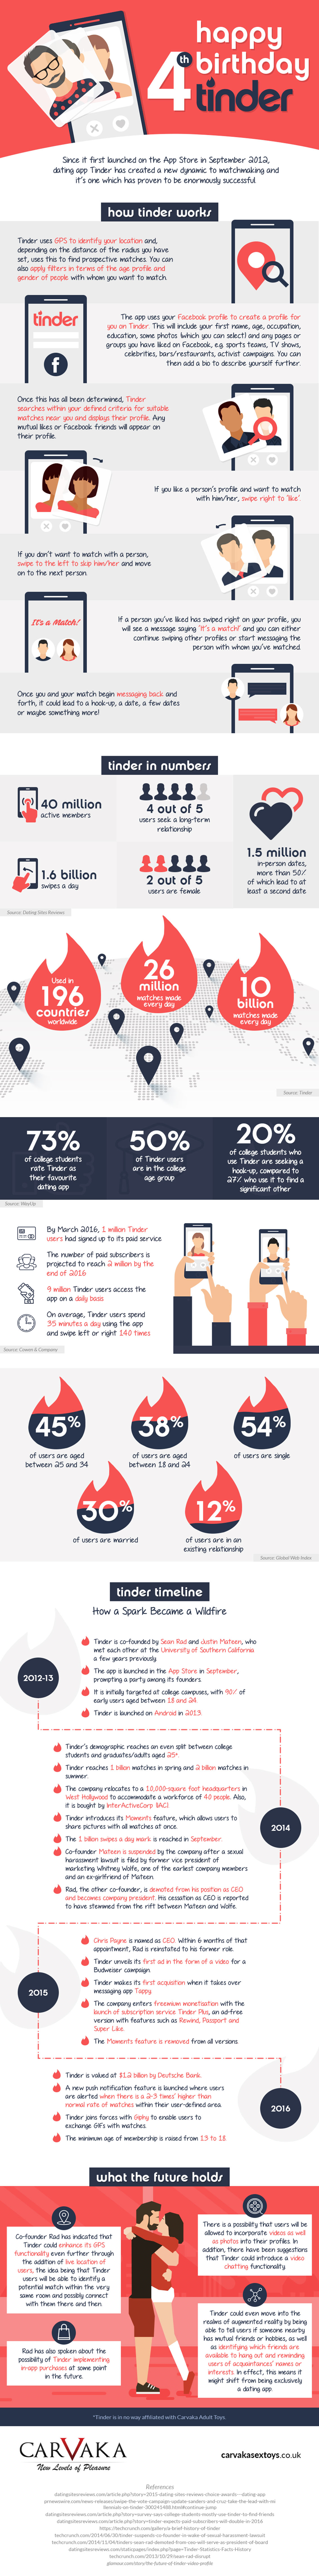 How Tinder App Changed Dating in Four Years Infographic